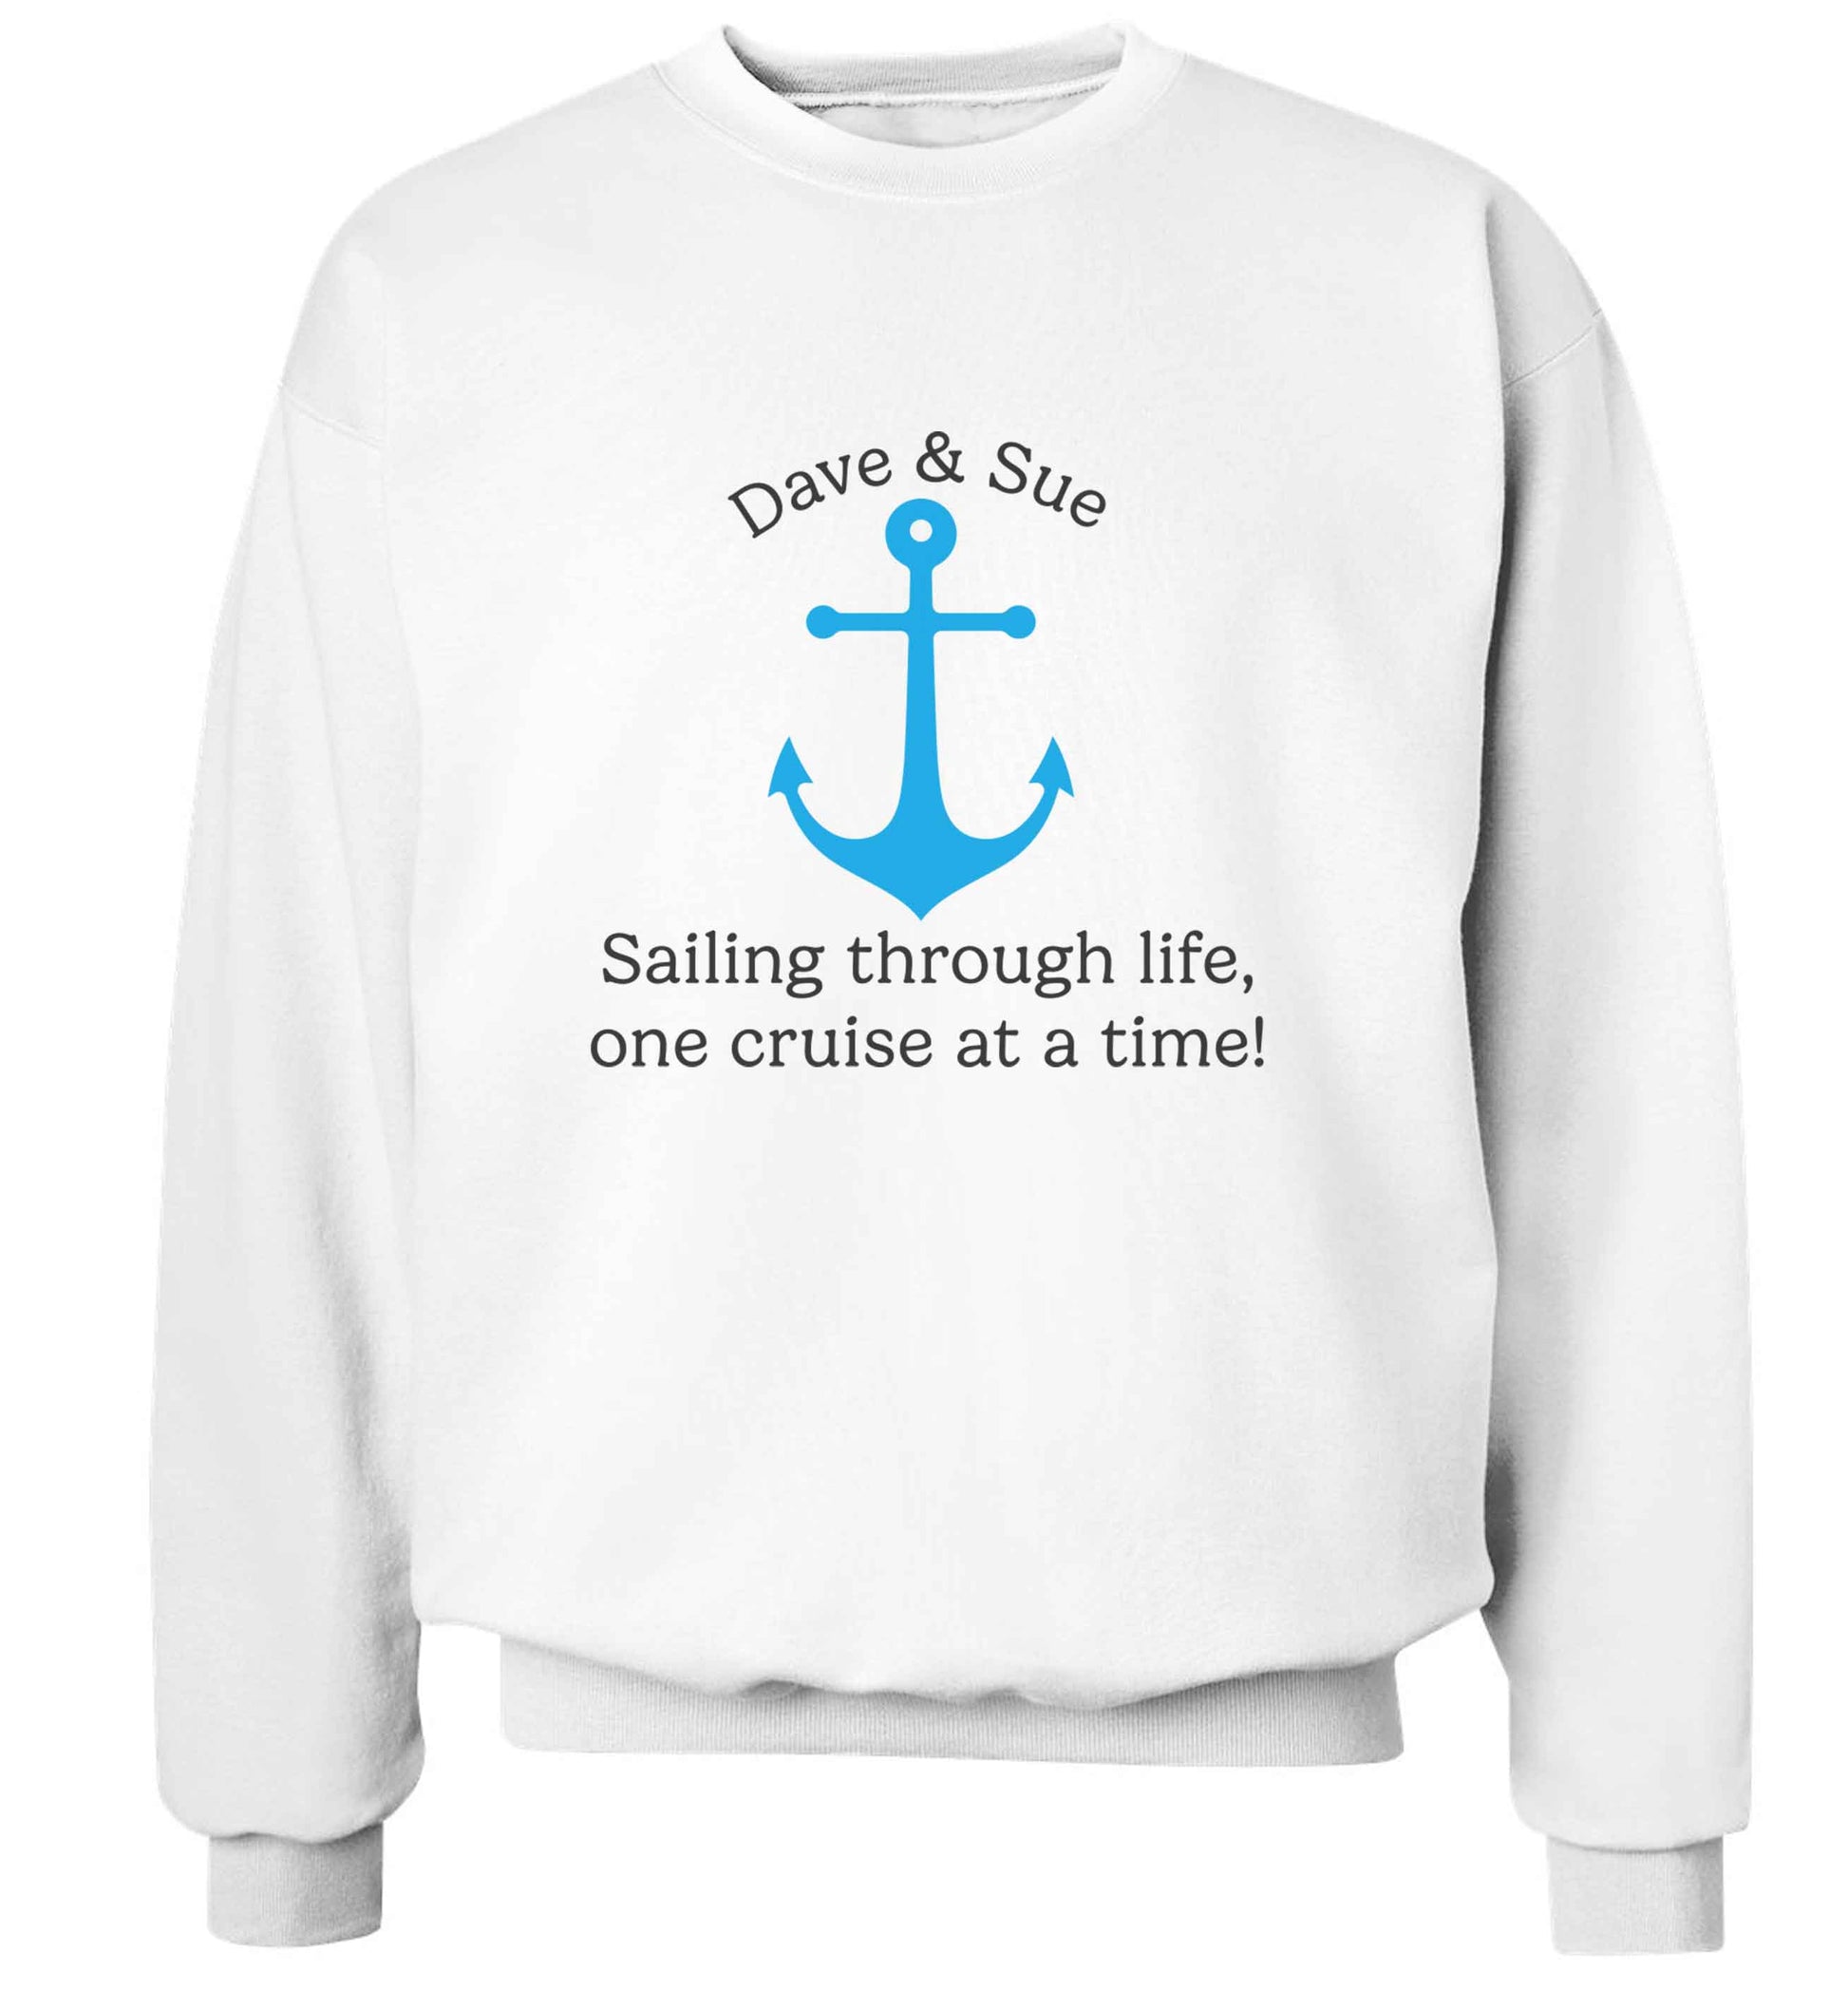 Sailing through life one cruise at a time - personalised adult's unisex white sweater 2XL